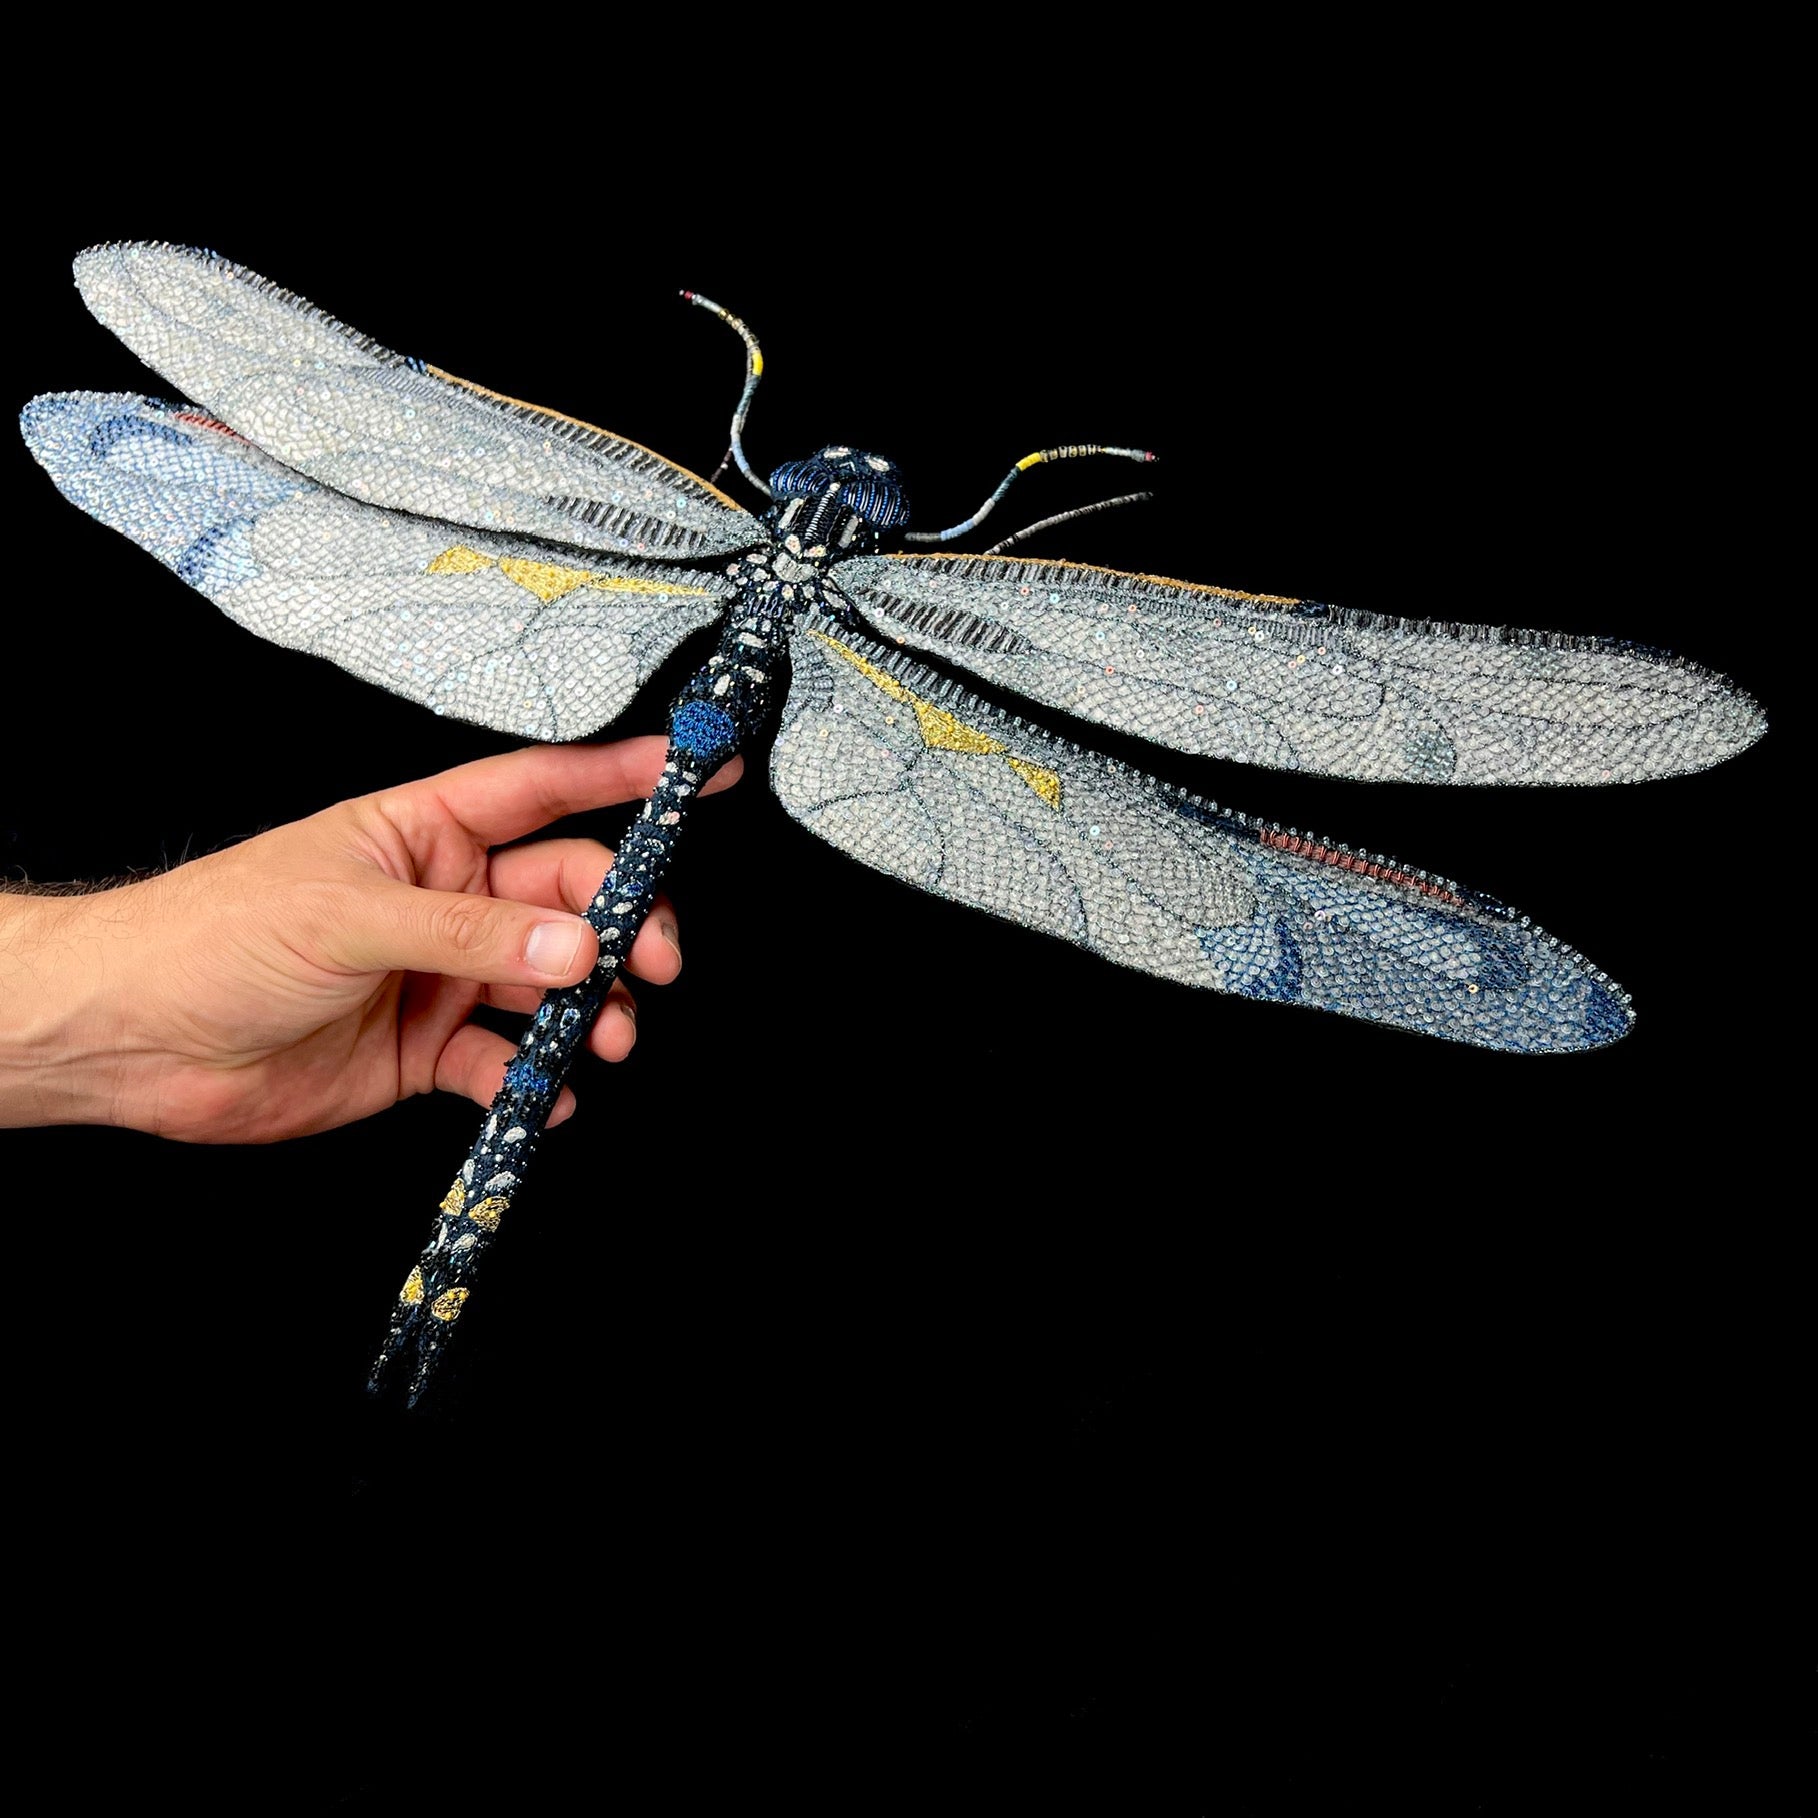 Dragonfly Wall Adornment shown held in hand